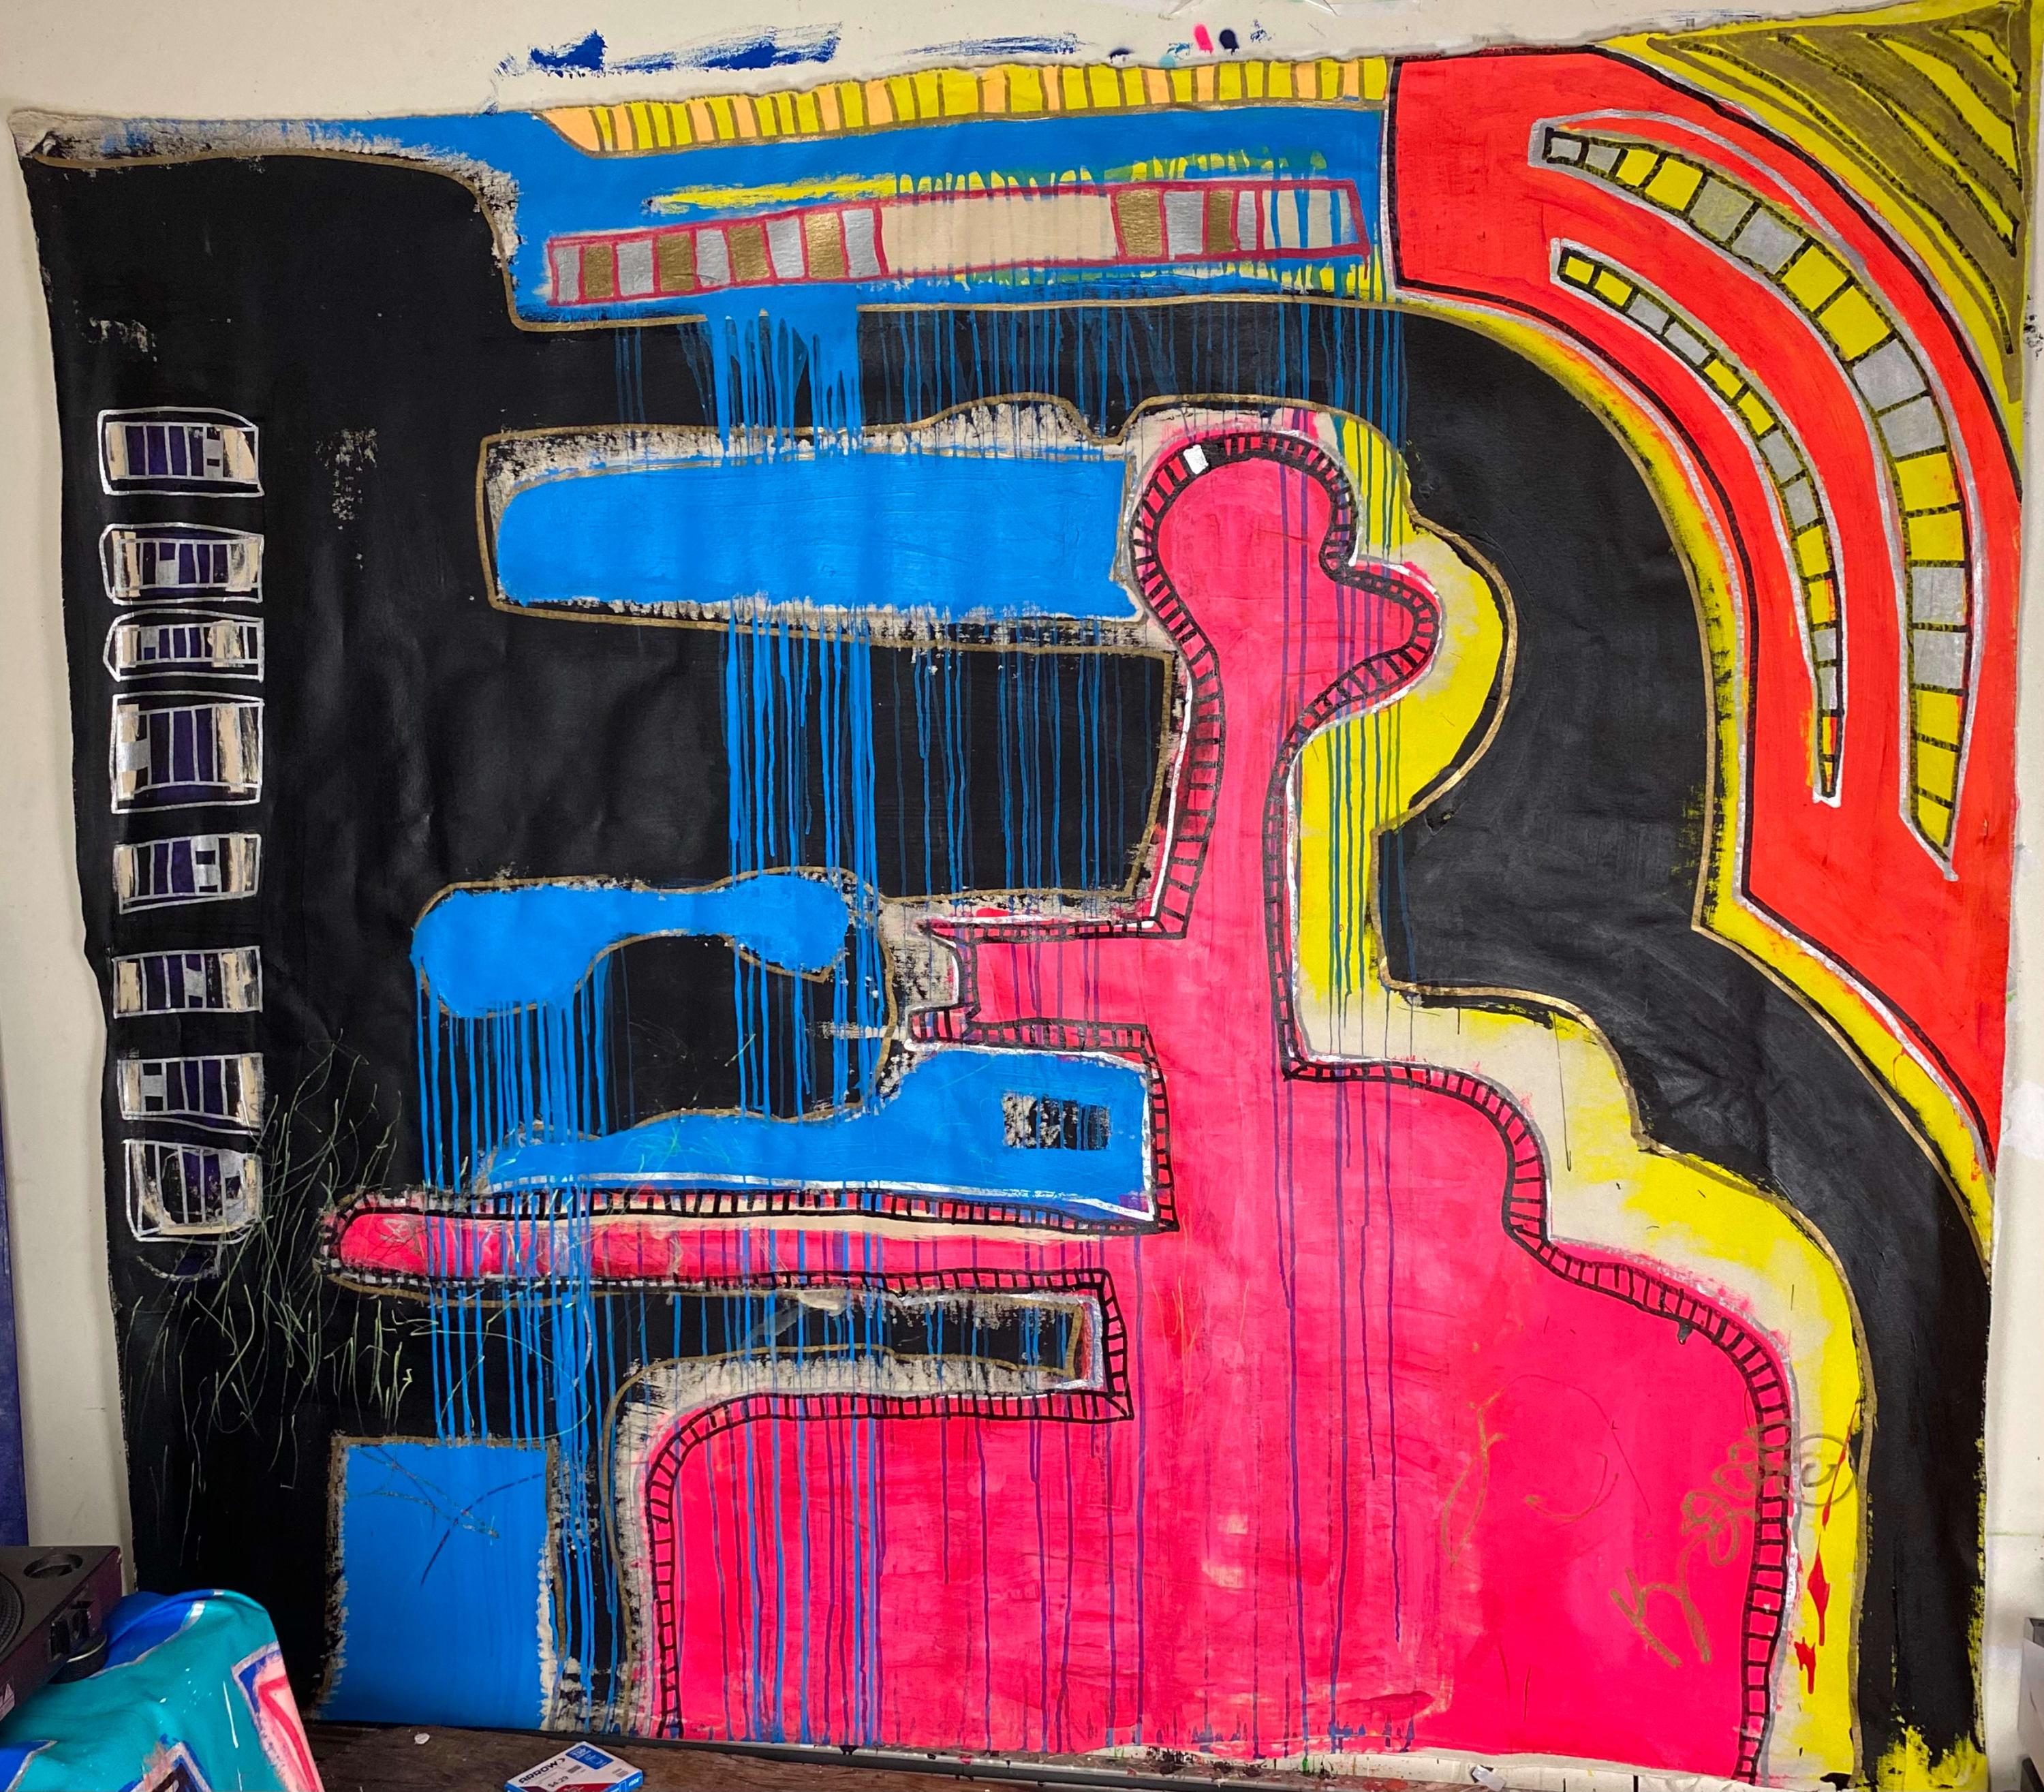 Large boldly coloured abstract painting with high contrast. Mixed media painting on canvas by Kimyon Huggins. Abstract expressionist piece in tones of pink, blue, yellow, orange and black. Signed by artist. 

ARTIST BIO
DJ, Producer, Visual Artist